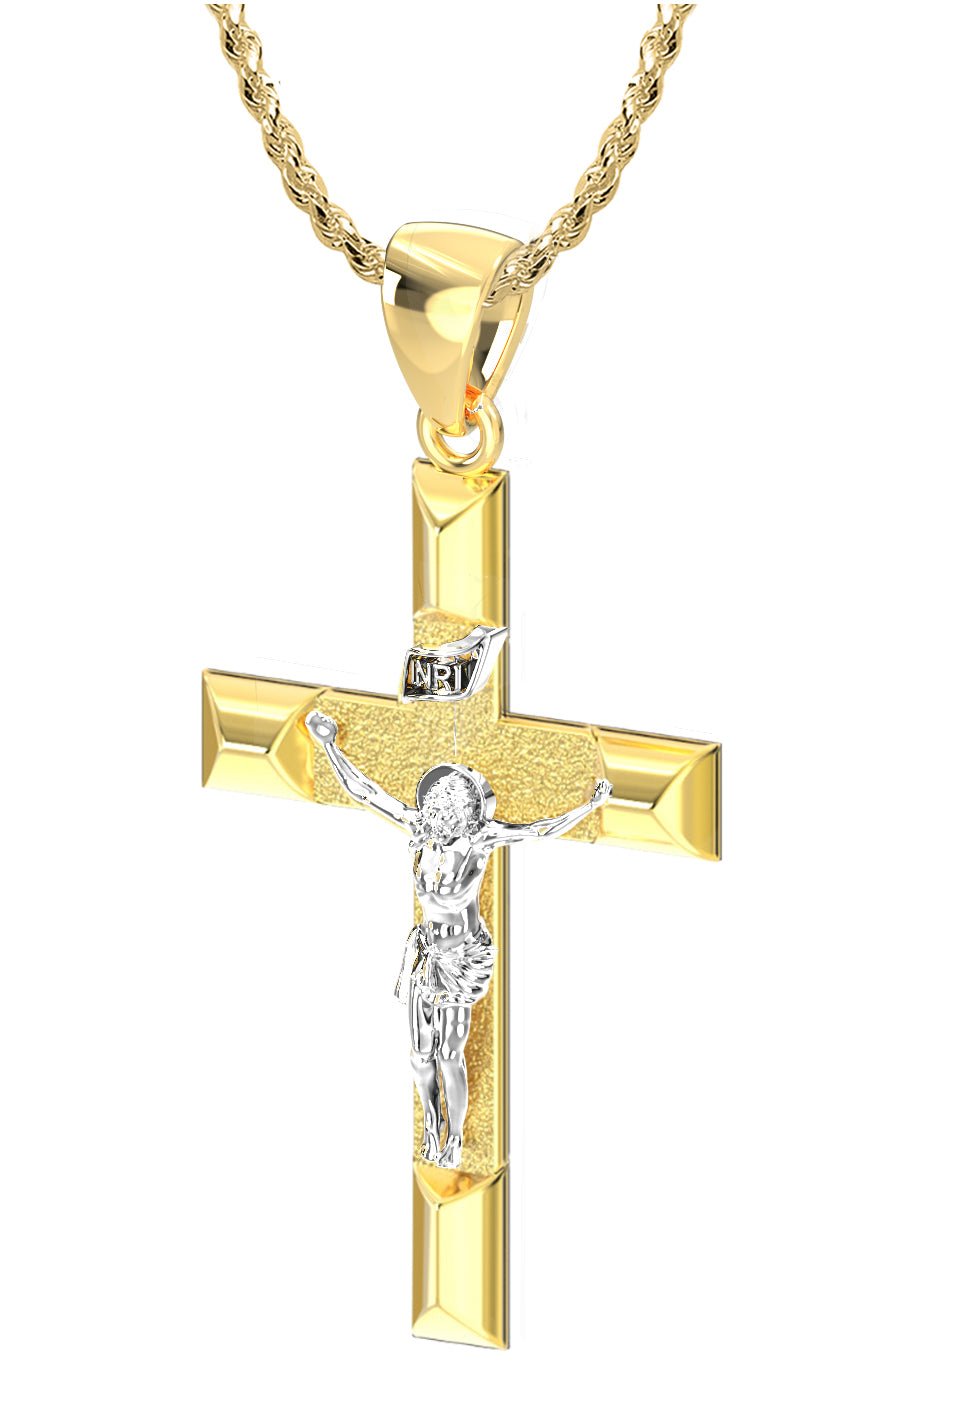 Cross Necklaces For Women: 15 Designs You Will Love | Classy Women  Collection